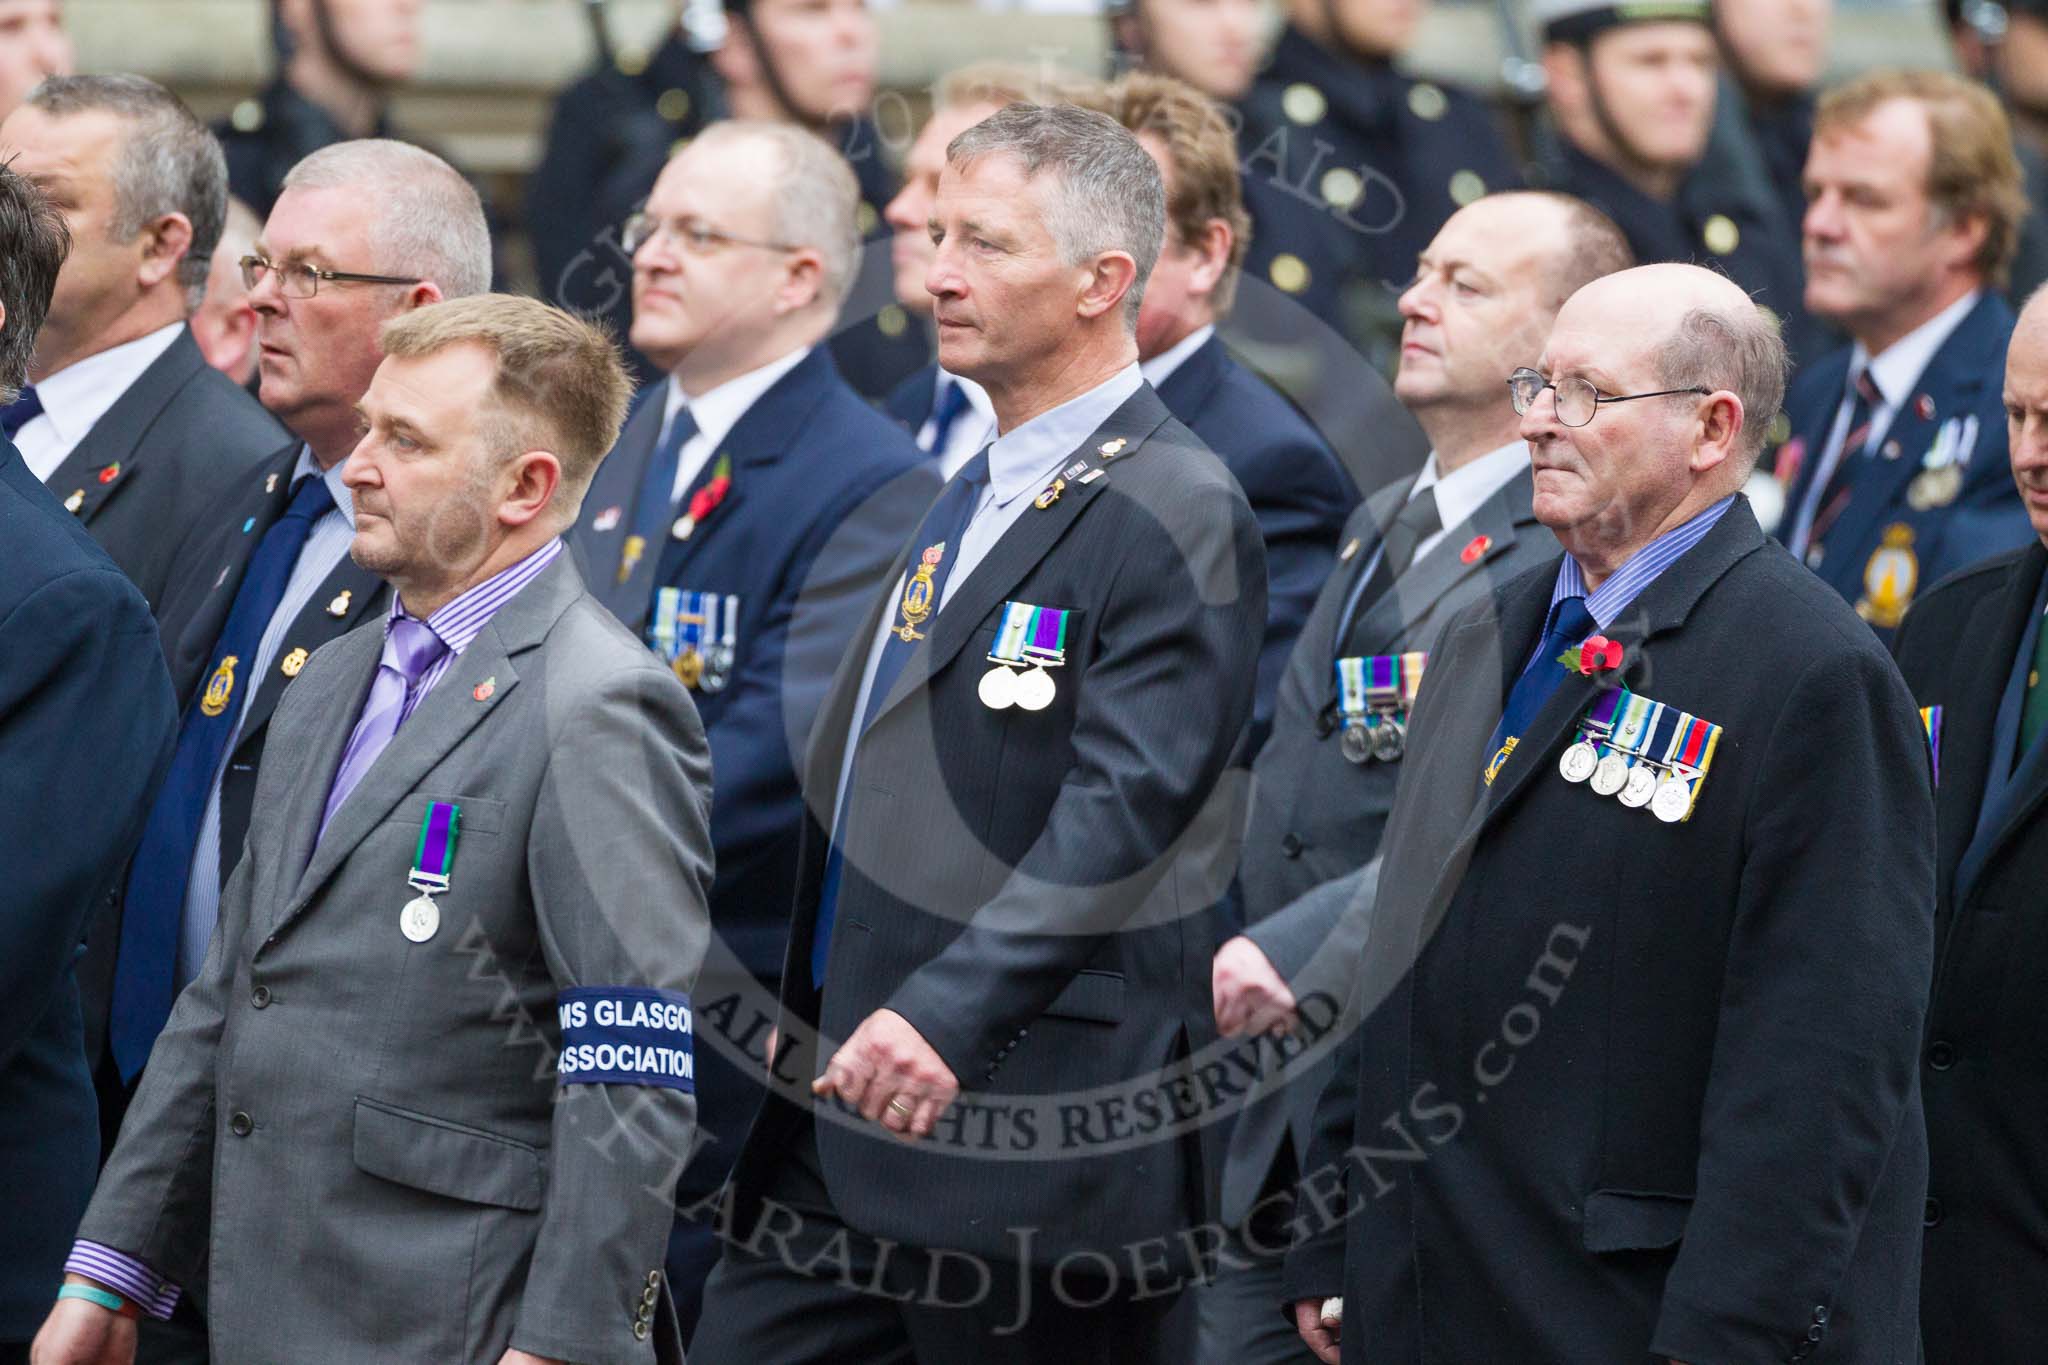 Remembrance Sunday at the Cenotaph 2015: Group E11, HMS Glasgow Association.
Cenotaph, Whitehall, London SW1,
London,
Greater London,
United Kingdom,
on 08 November 2015 at 12:00, image #860